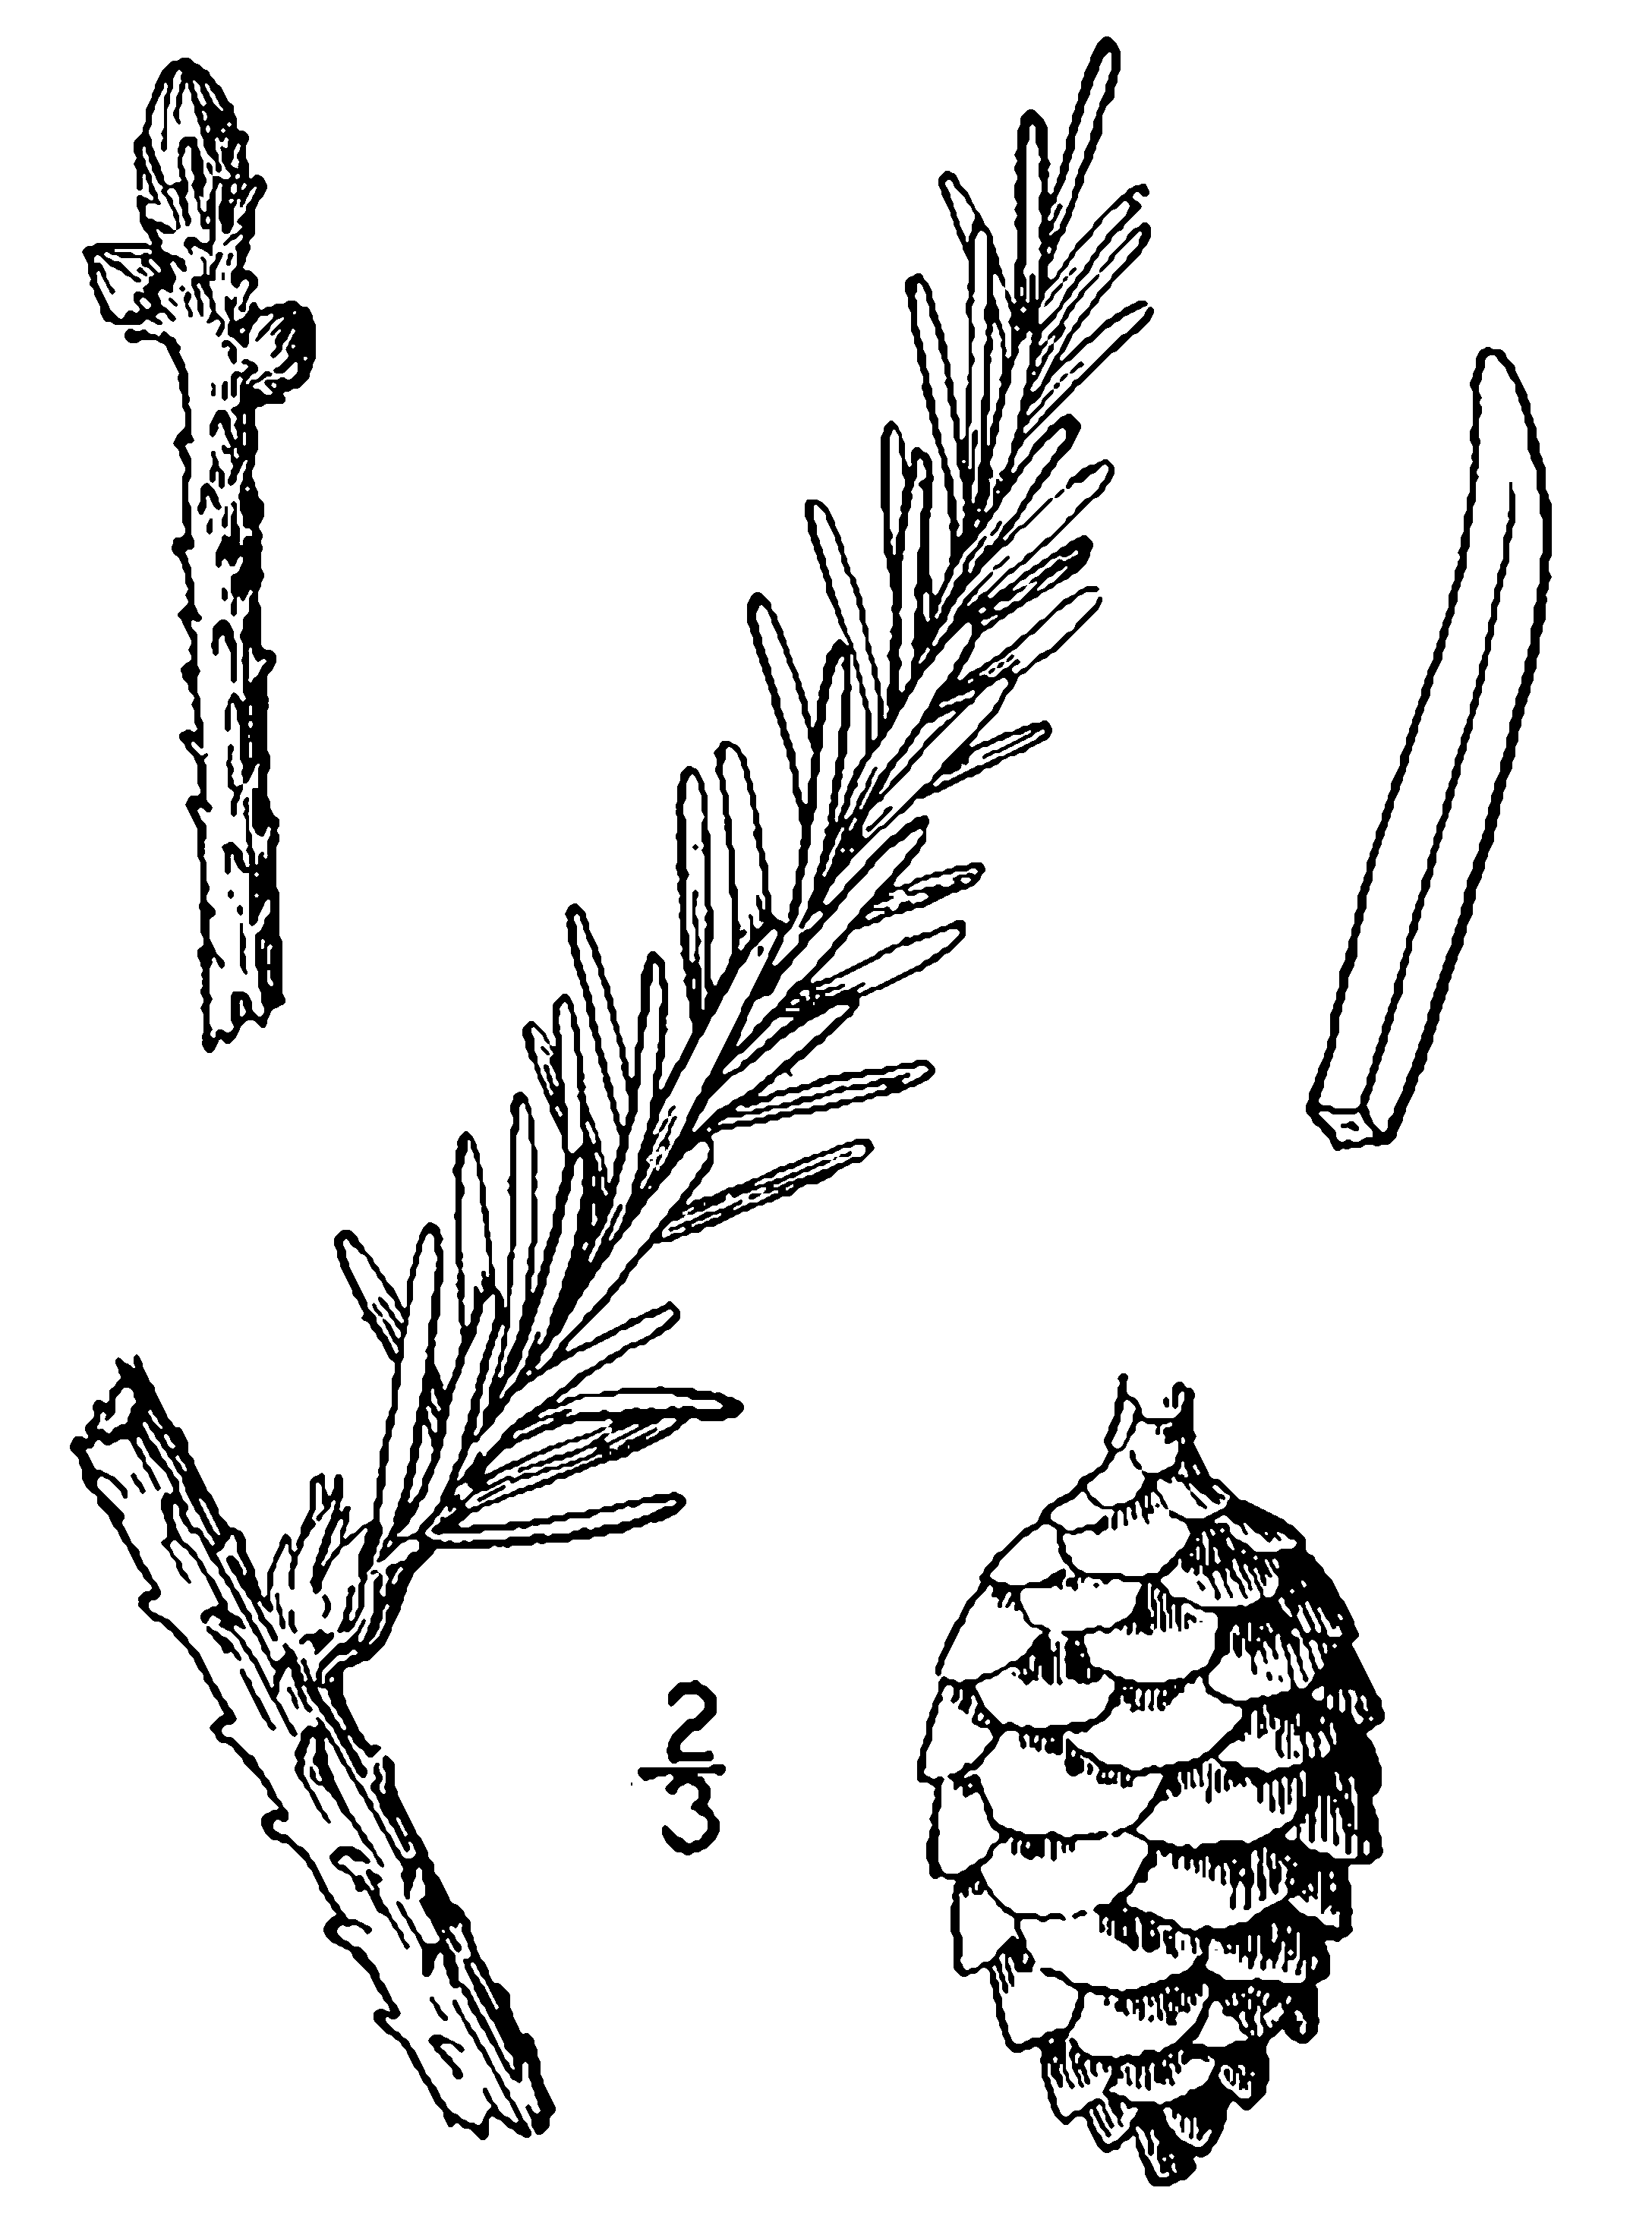 File:Picea mariana drawing.png - Wikimedia Commons